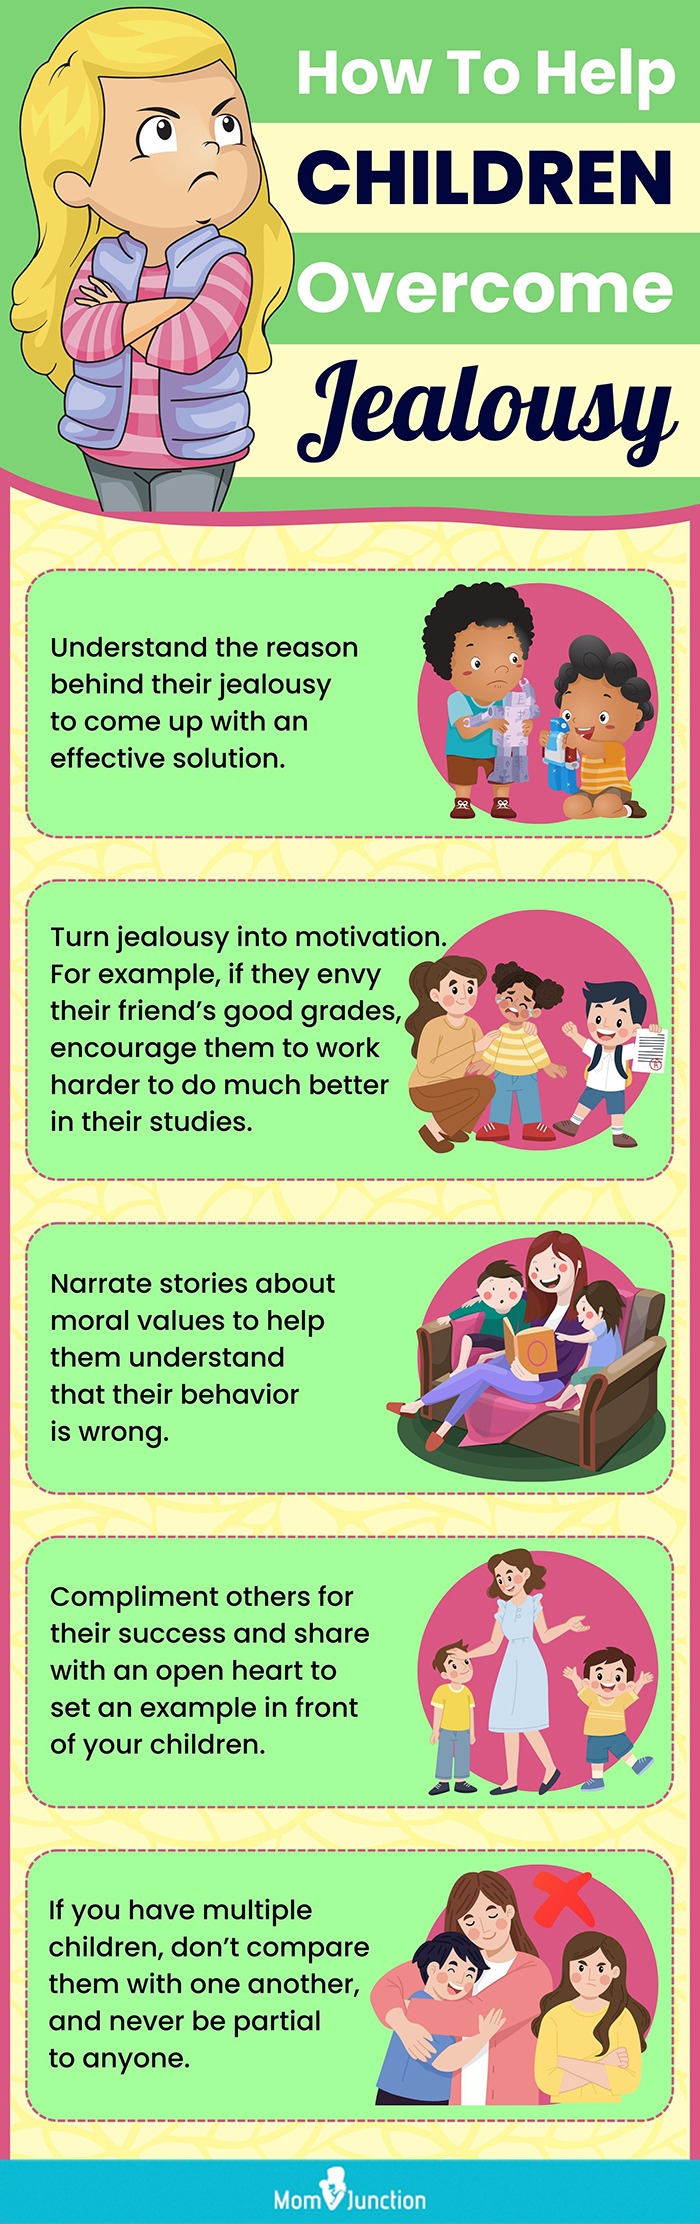 how to help children overcome jealousy (infographic)